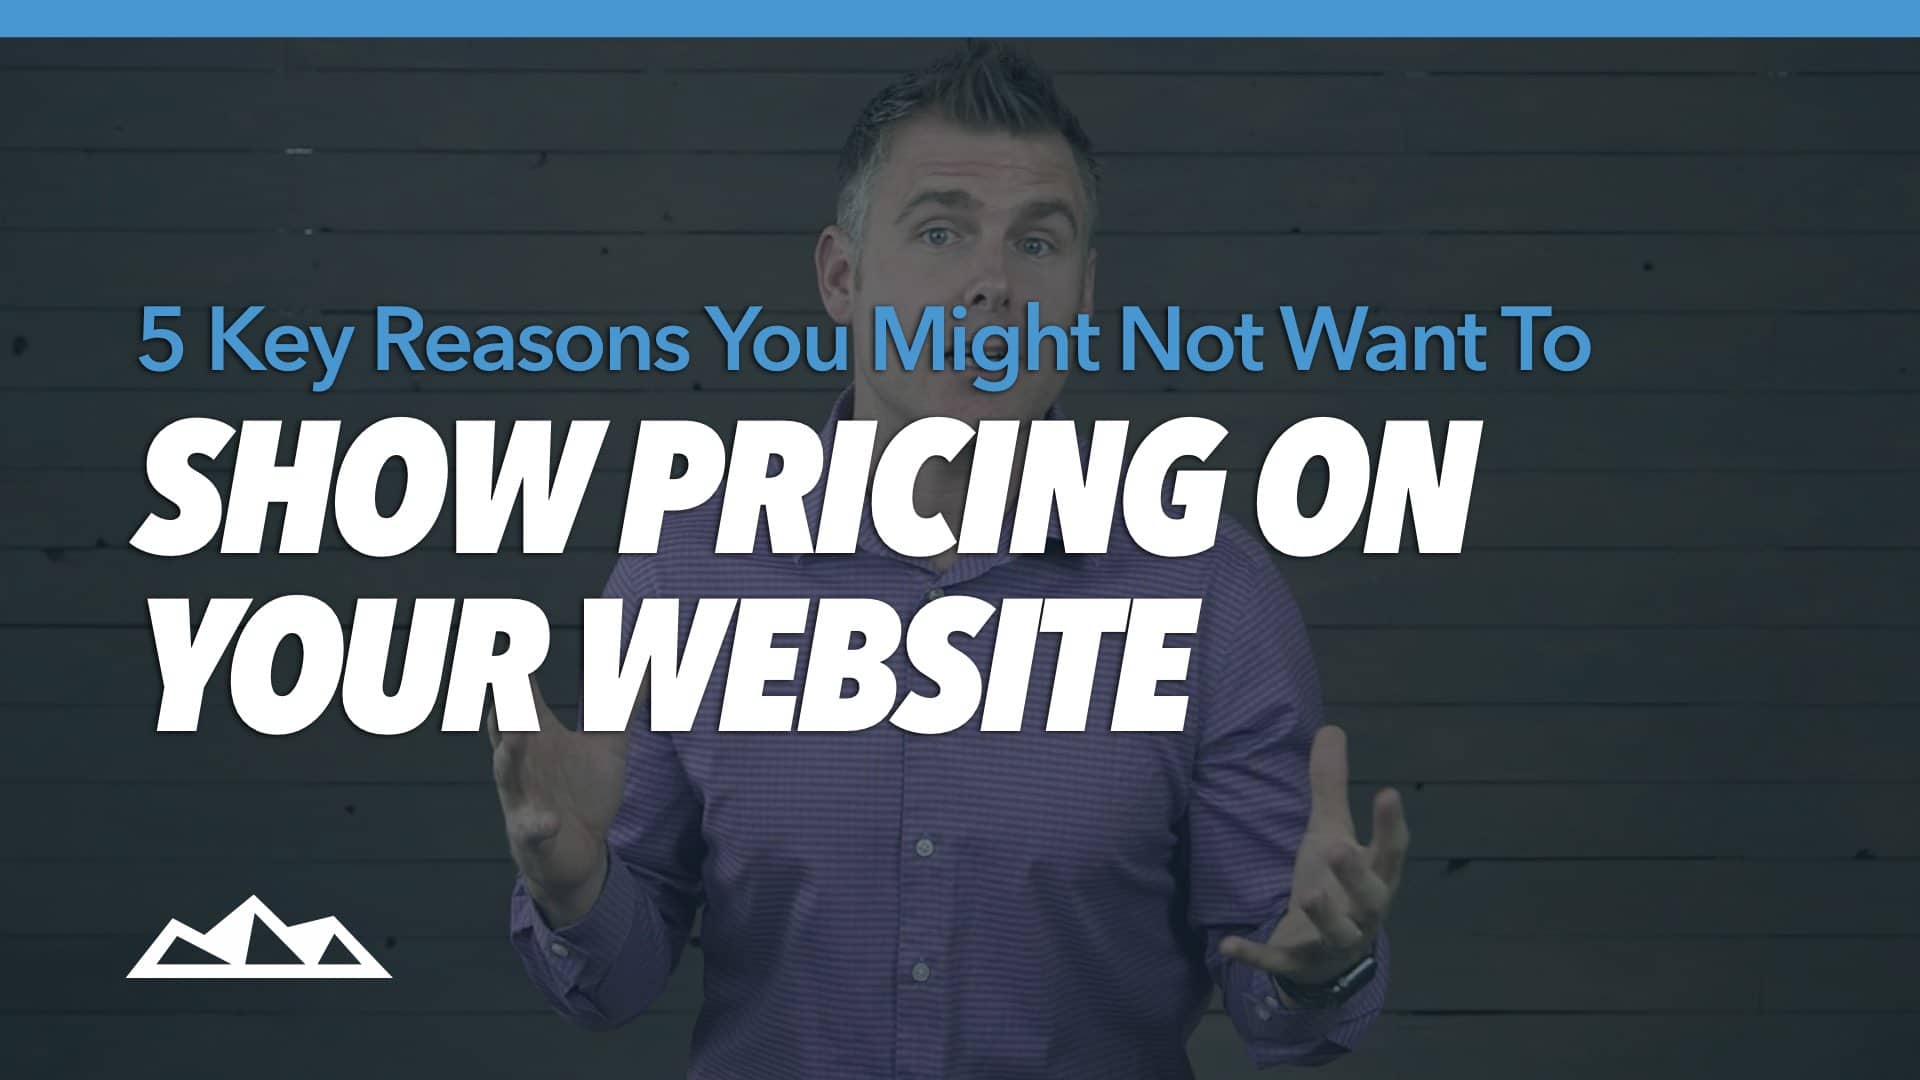 Five Reasons Why You Should NOT List Your Pricing on Your Website